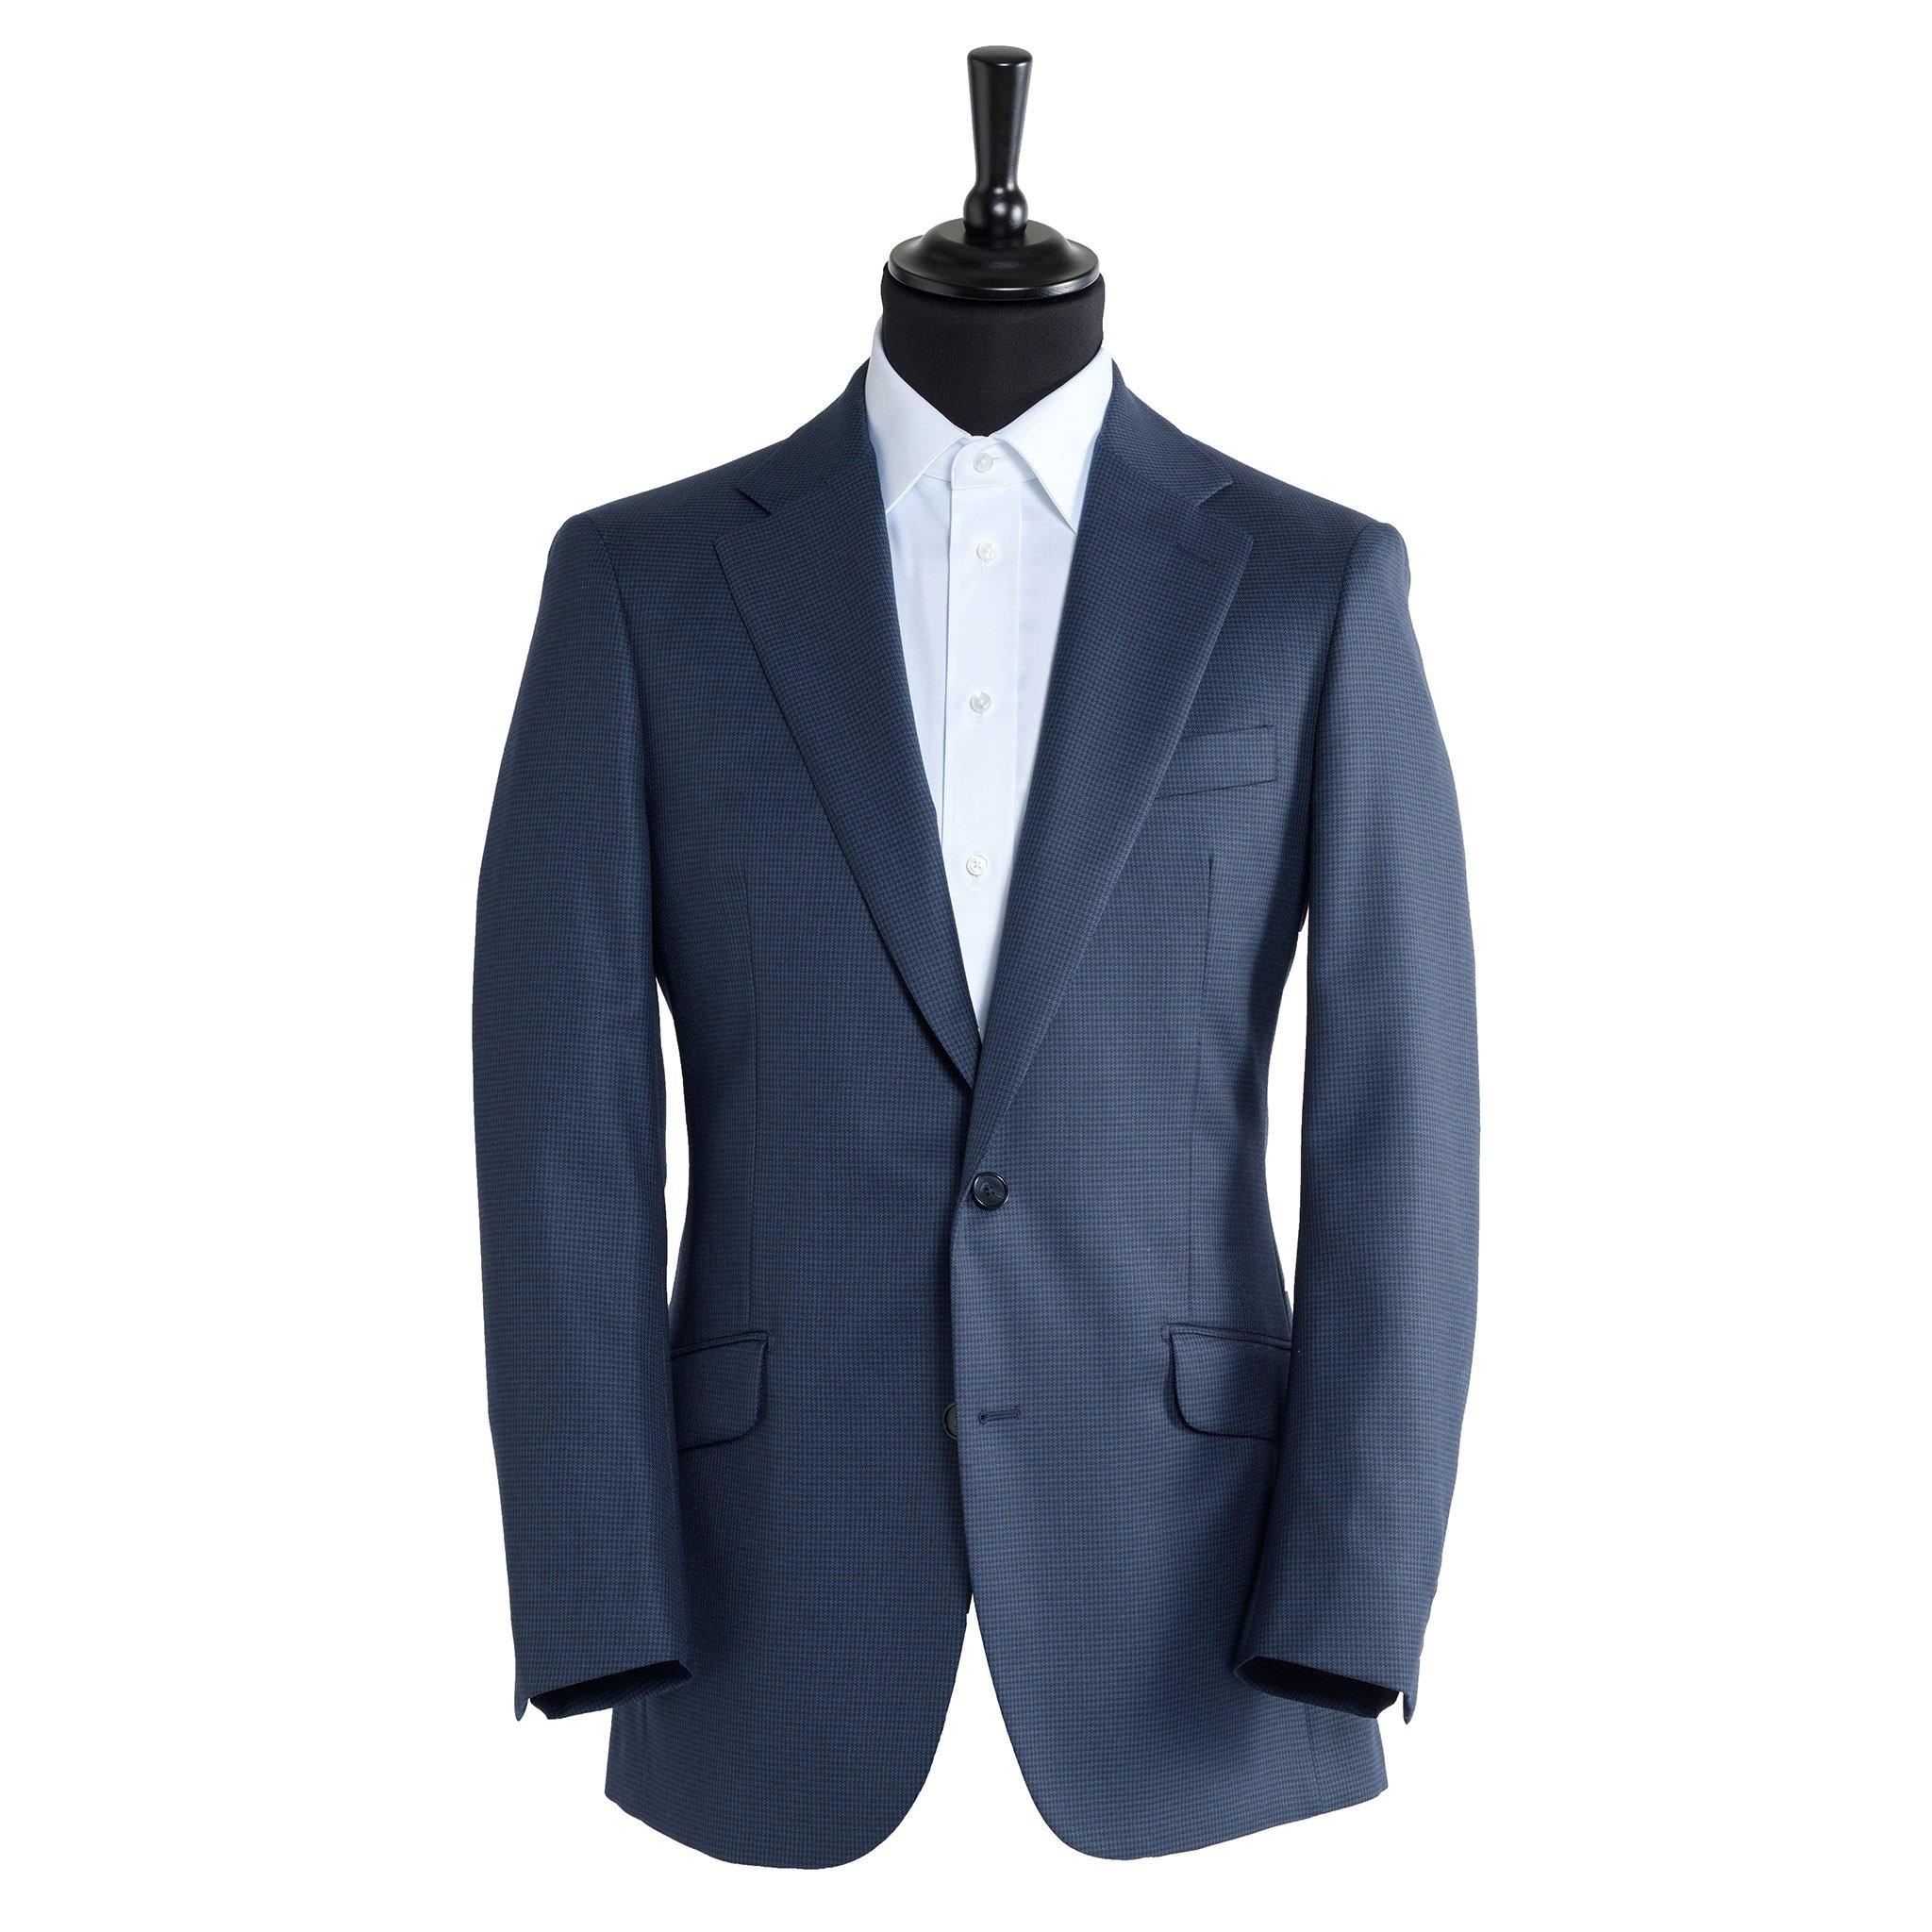 5 of the best suits for business Alexandra Wood